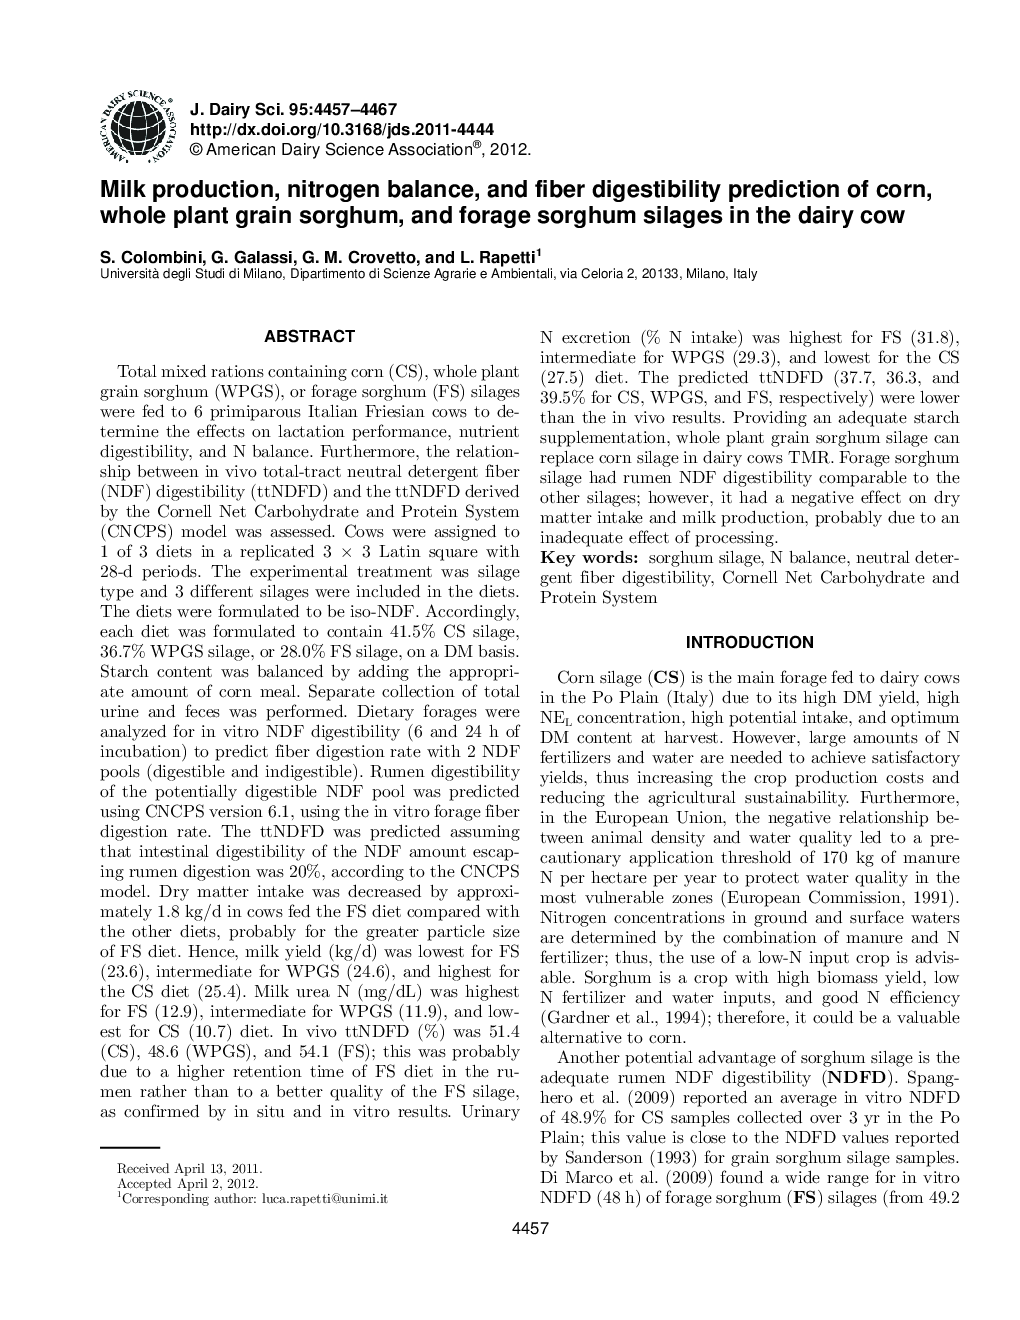 Milk production, nitrogen balance, and fiber digestibility prediction of corn, whole plant grain sorghum, and forage sorghum silages in the dairy cow